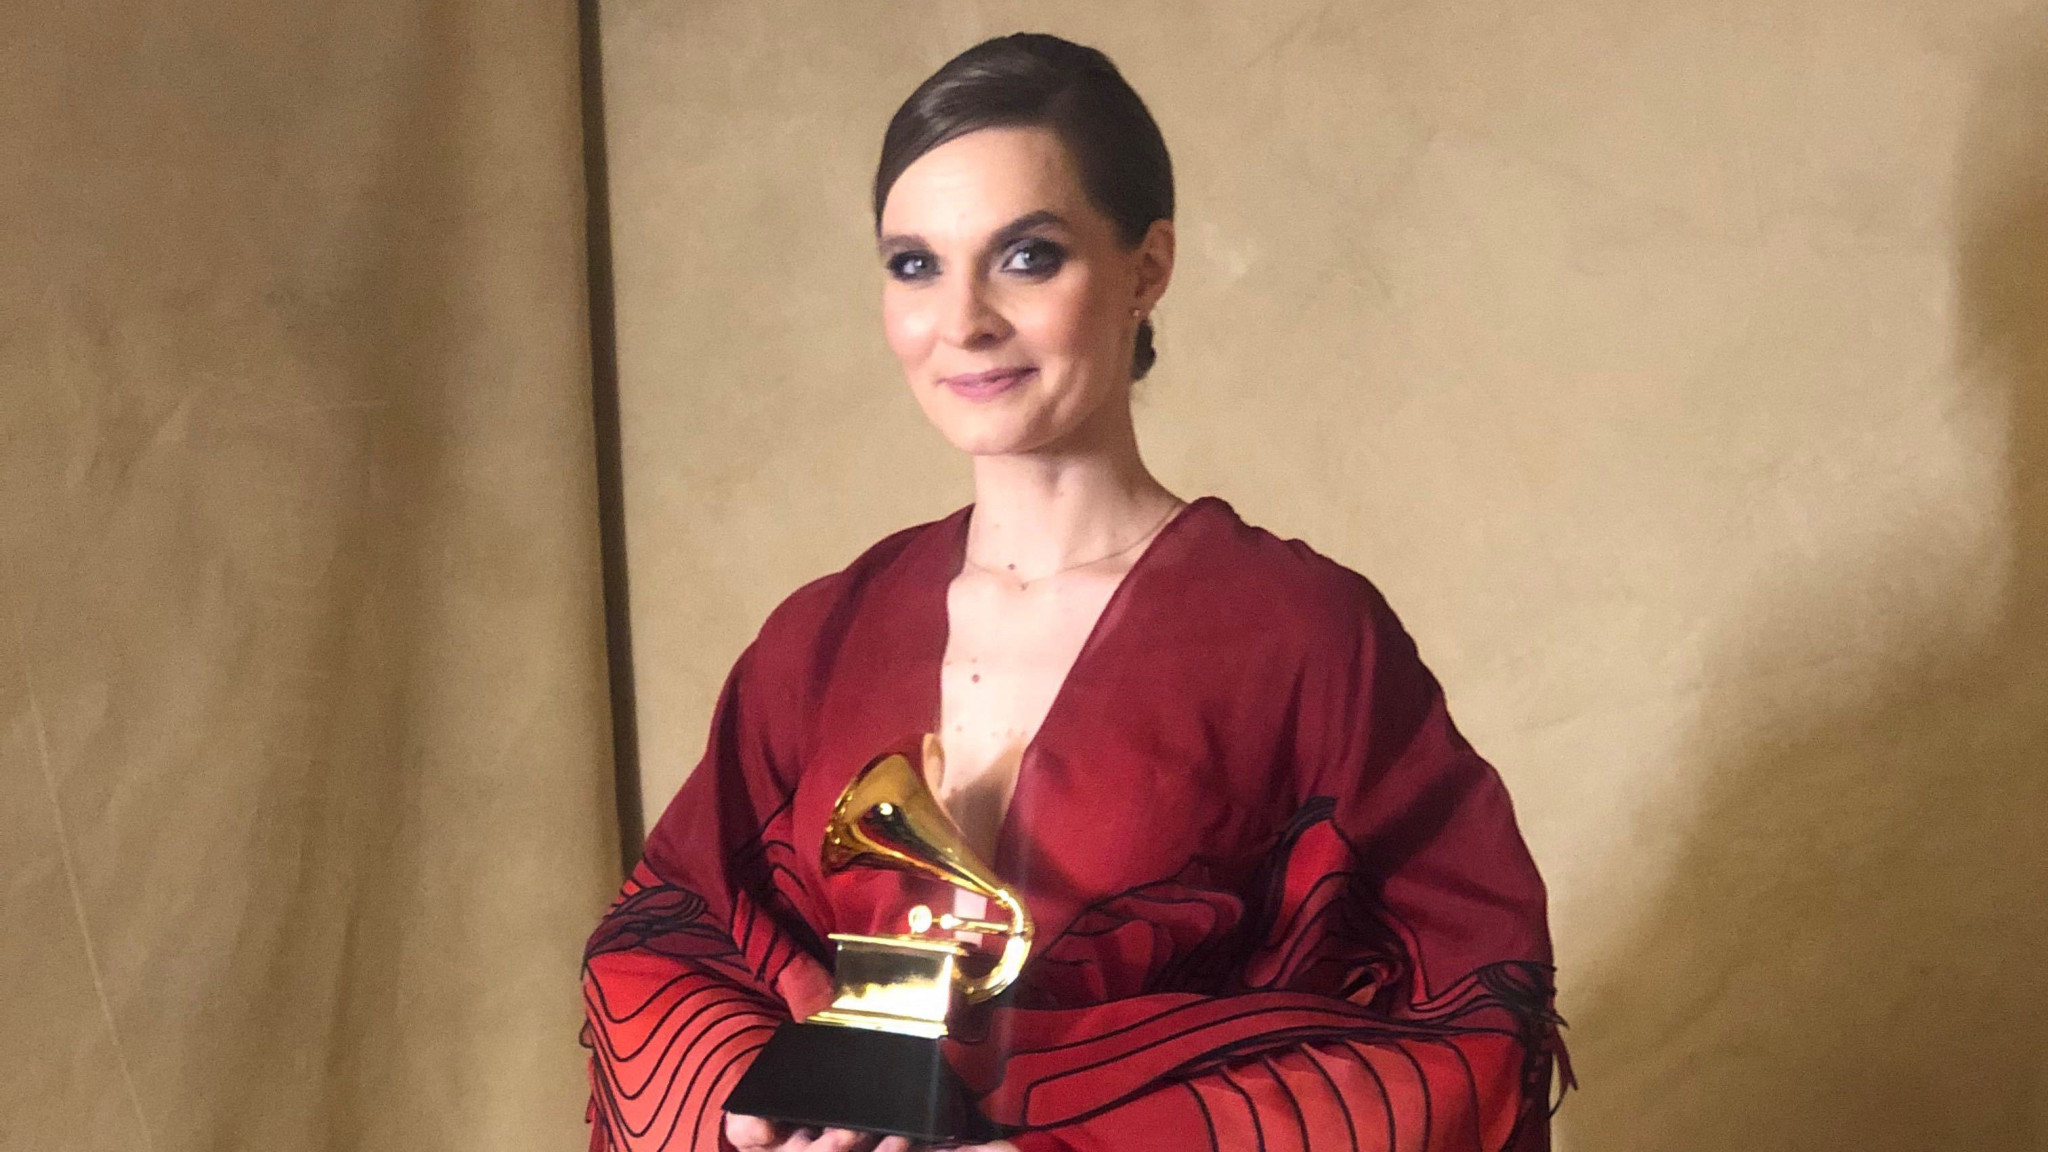 Record-breaking Chernobyl composer becomes first solo woman ever to win Grammy for best score